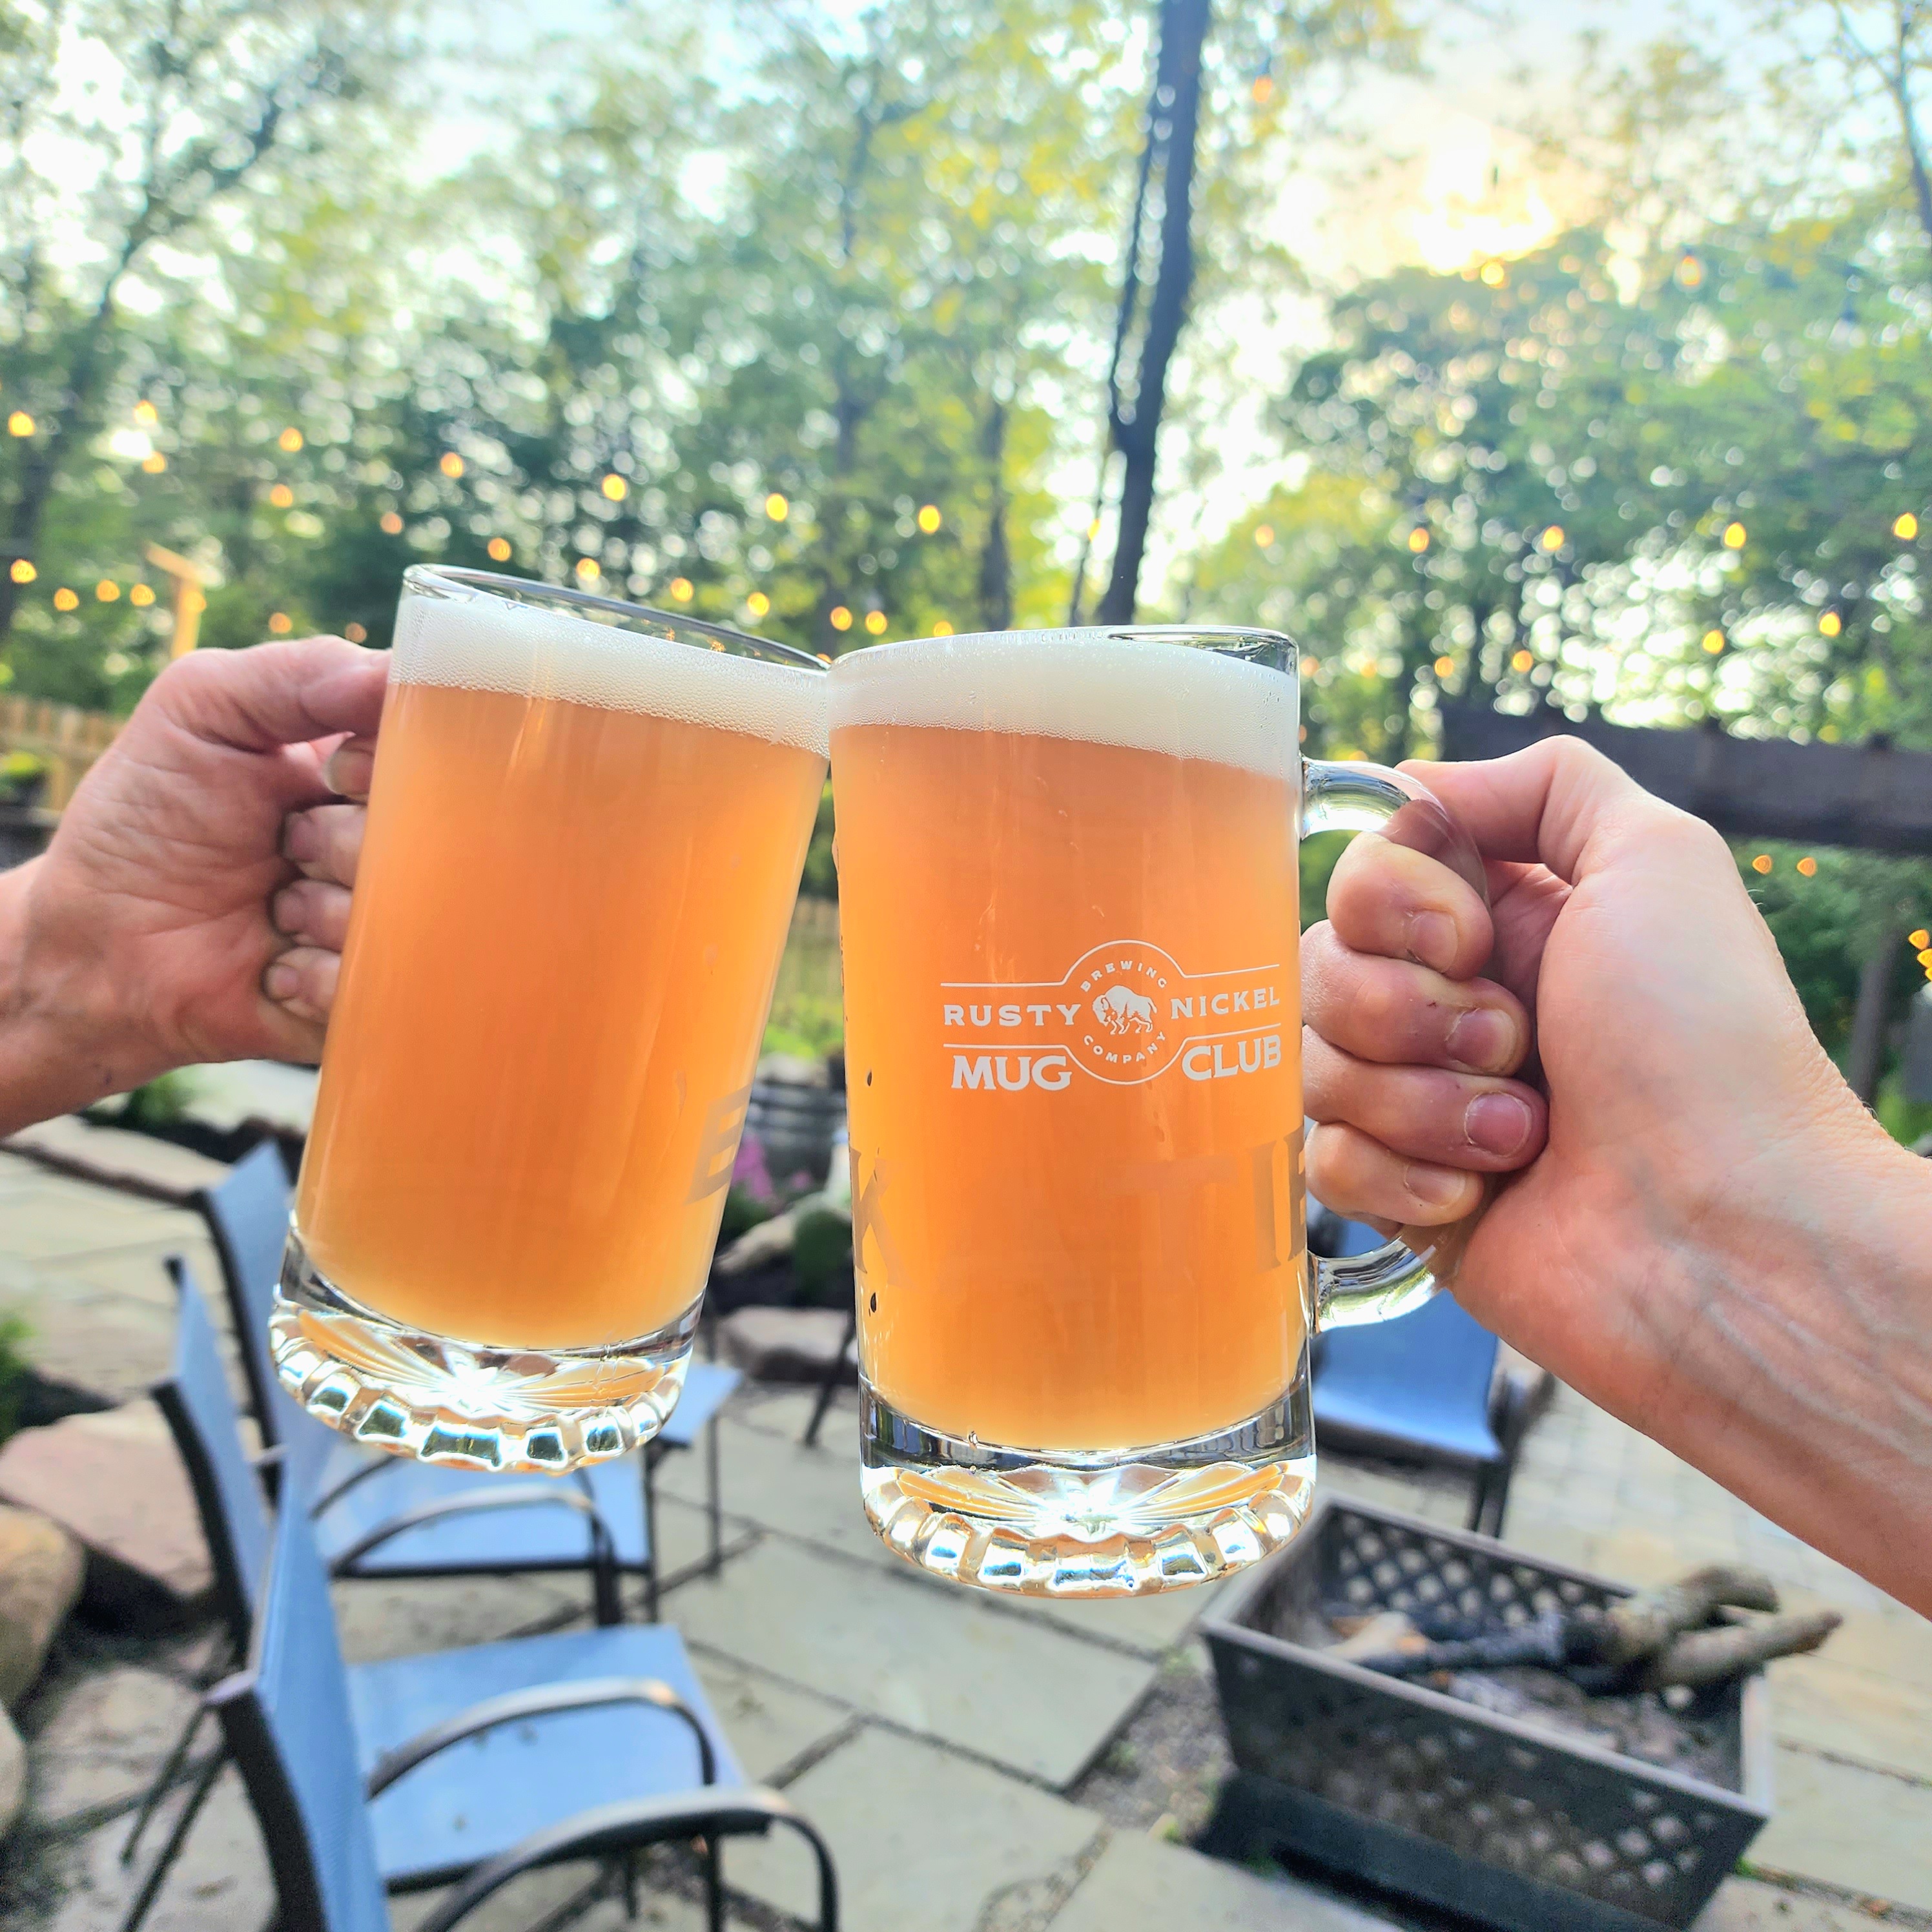 Two glass mugs are held up together for a toast on the patio. A summer scene of patio chairs, trees, and a fire pit are in the background.